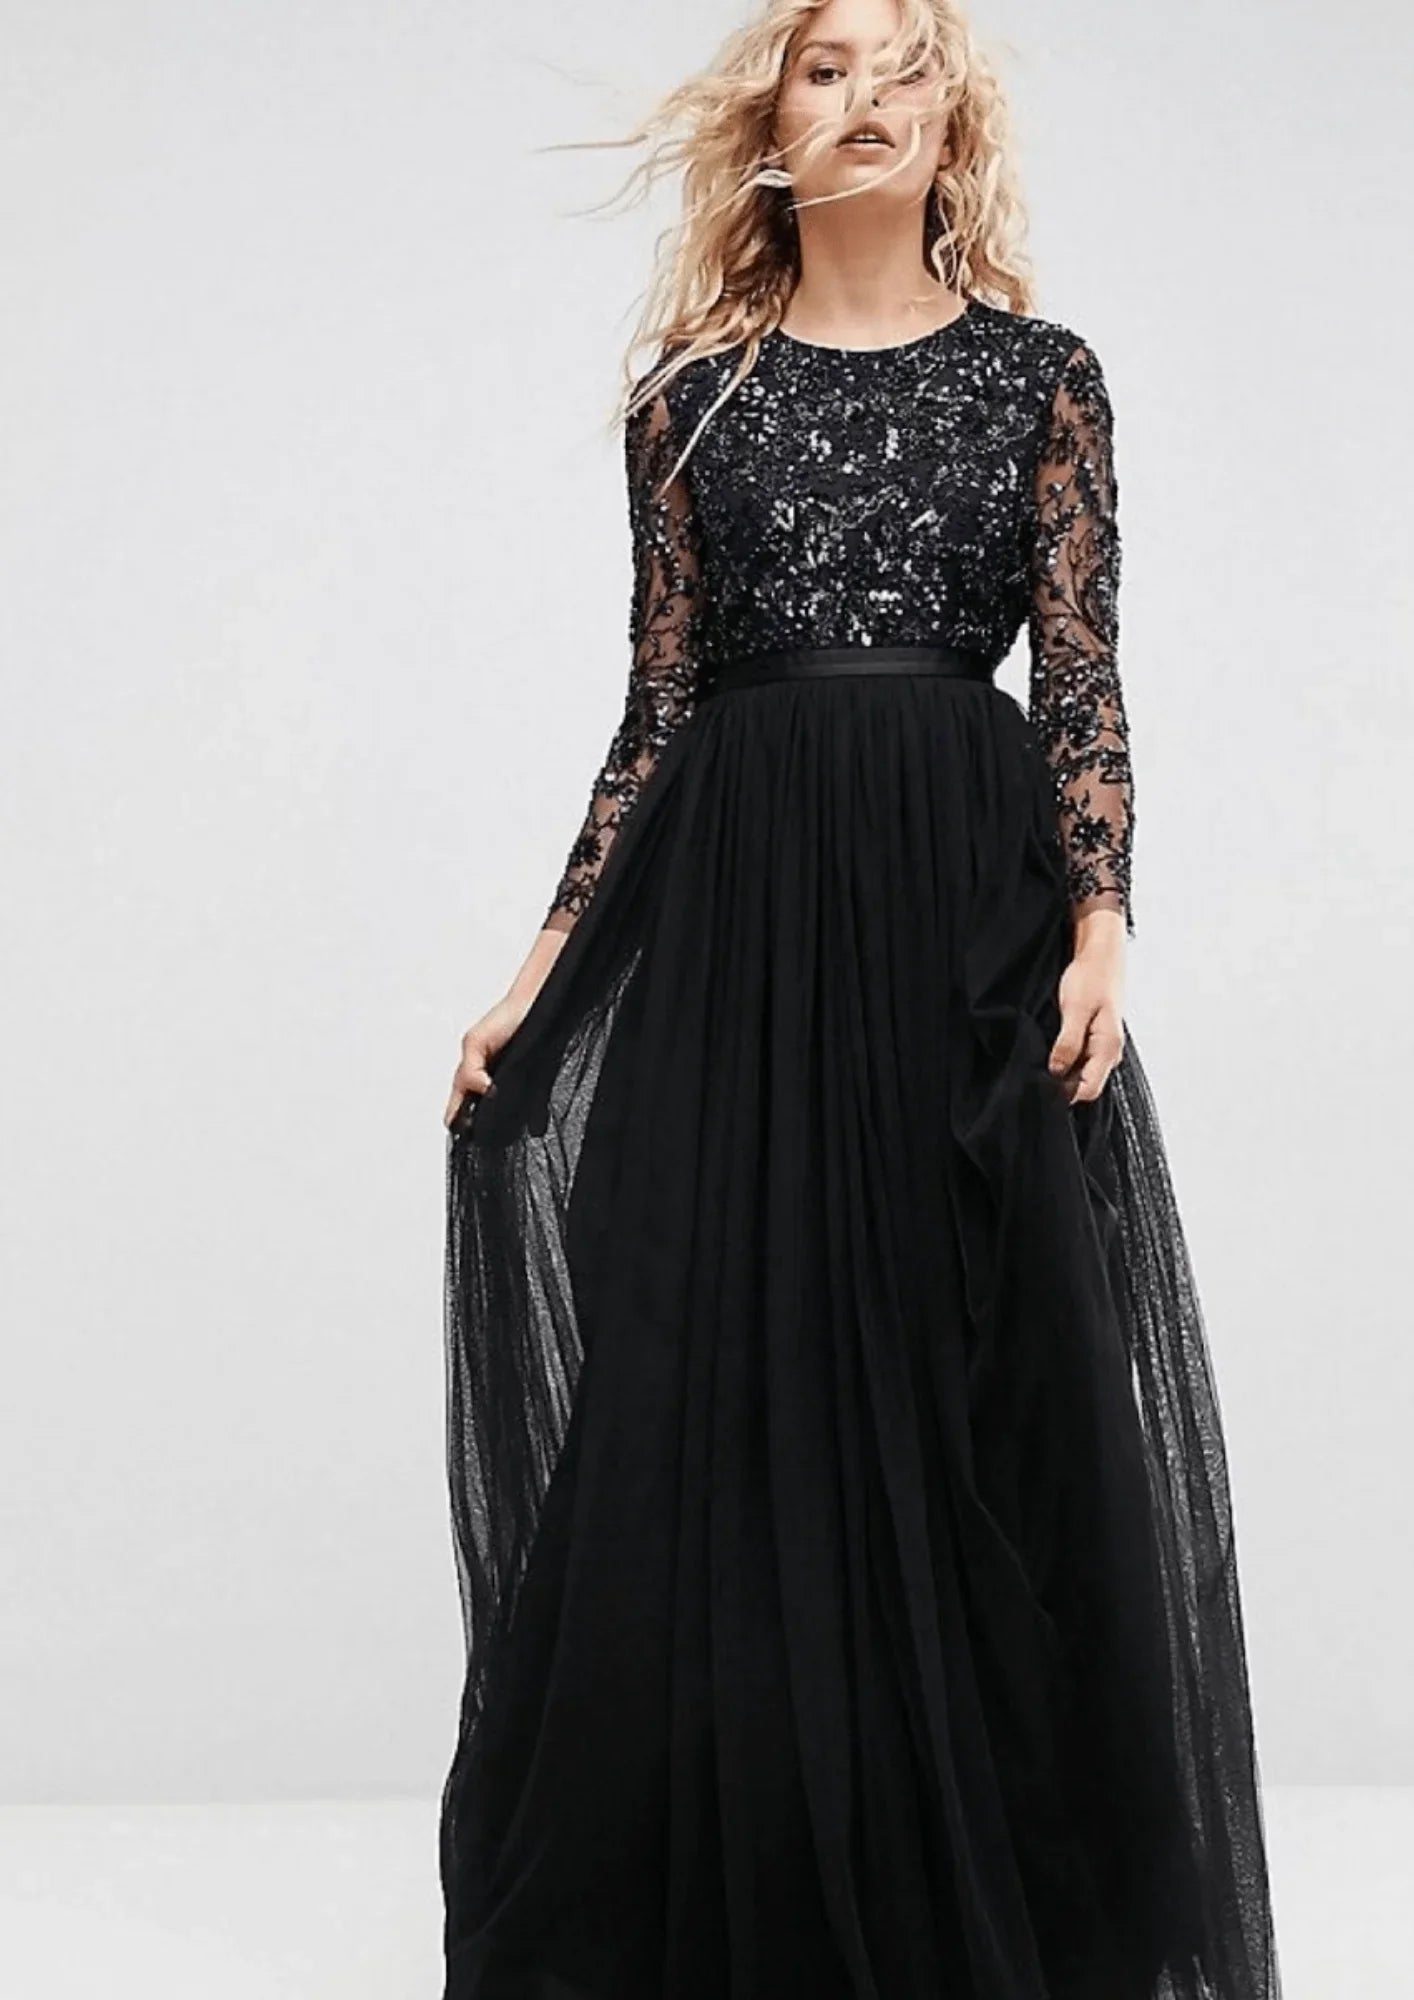 BLACK EMBROIDERED MAXI DRESS